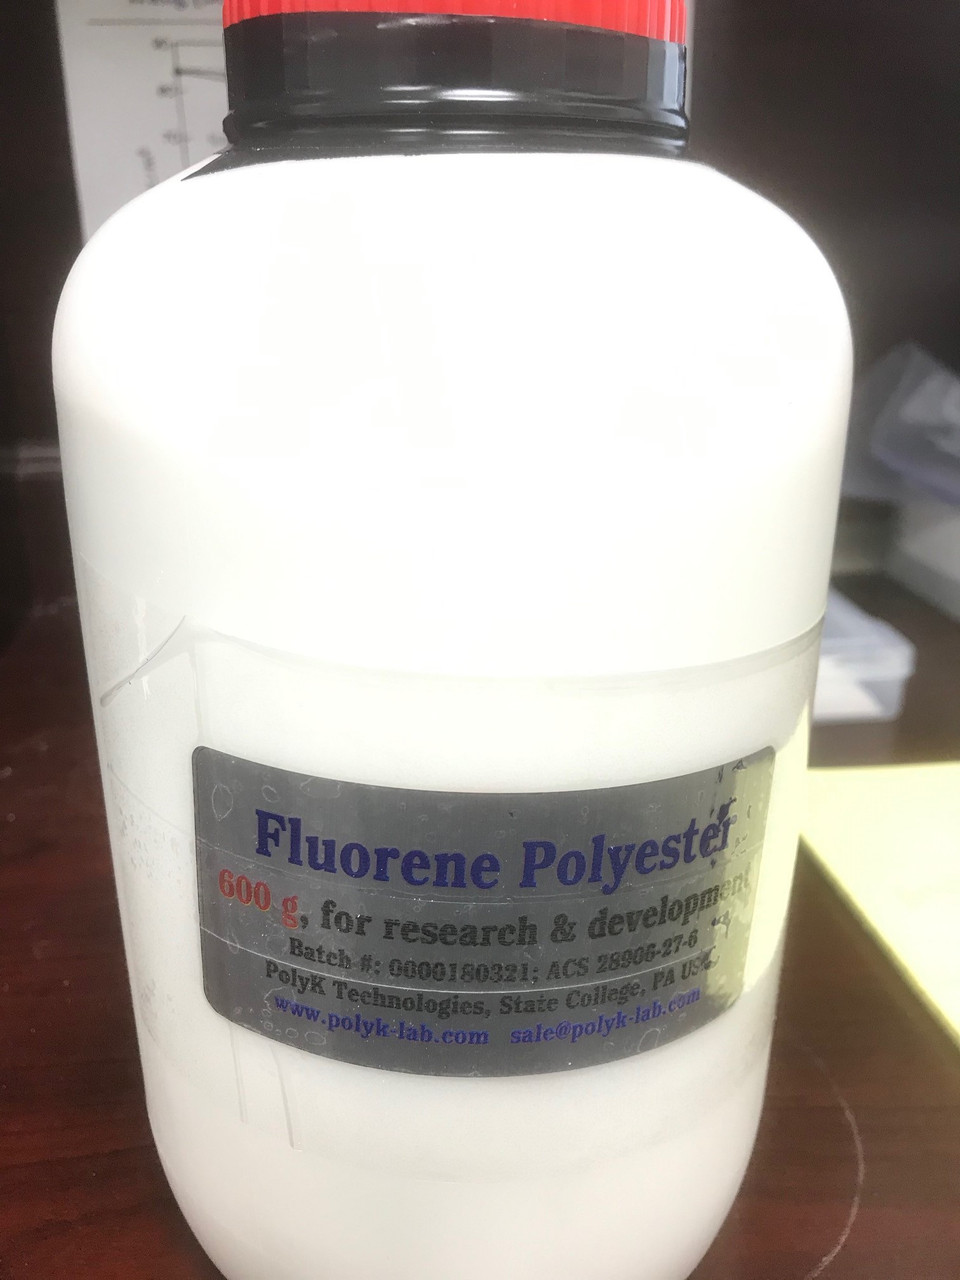 High Temperature Fluorene Polyester FPE Resin powder, Tg 330 C, Soluble in Common Organic Solvents